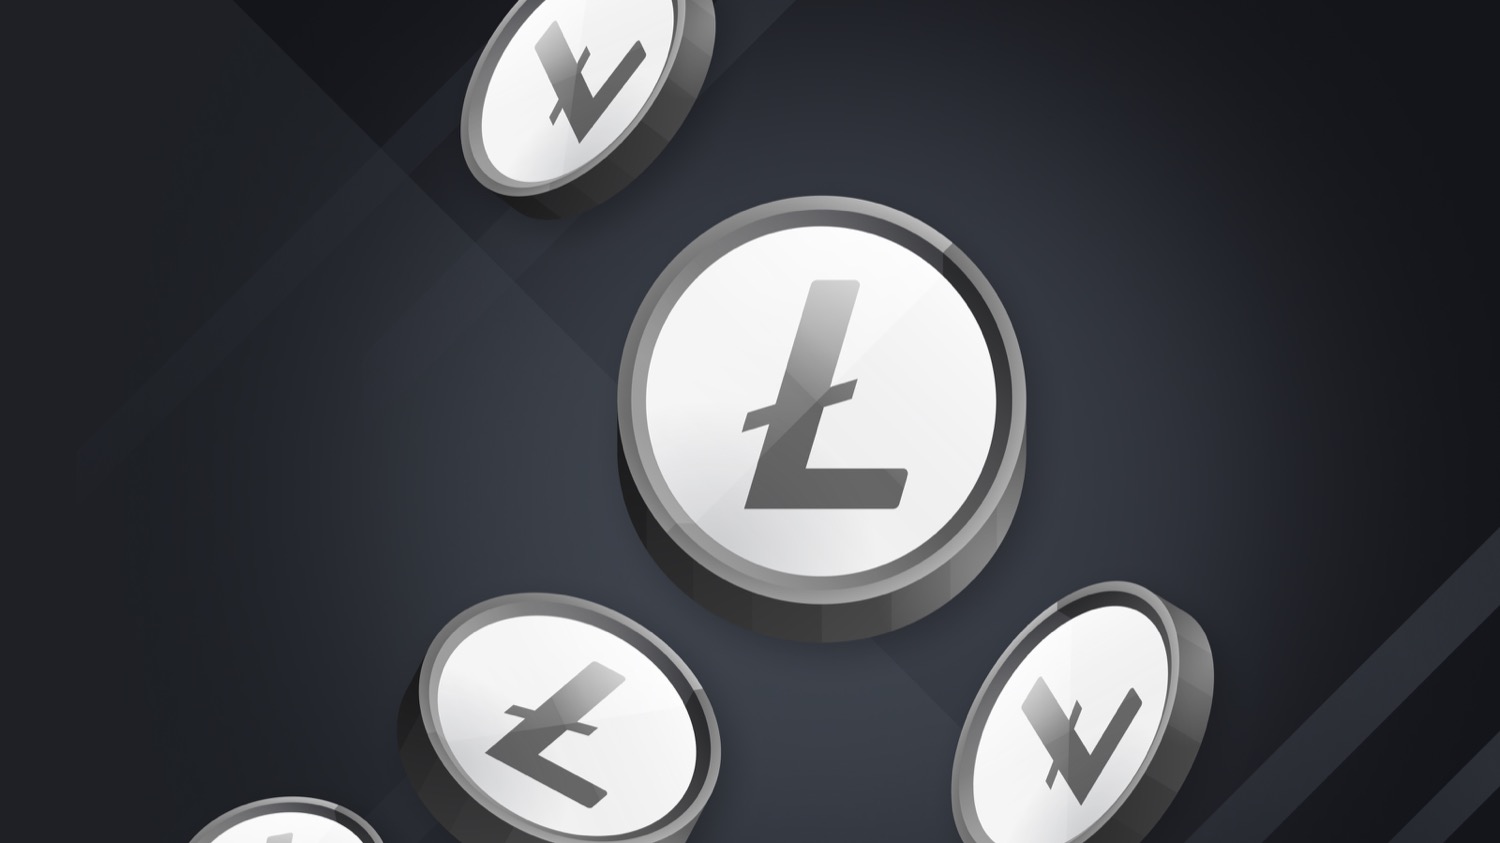 All About Litecoin (LTC)